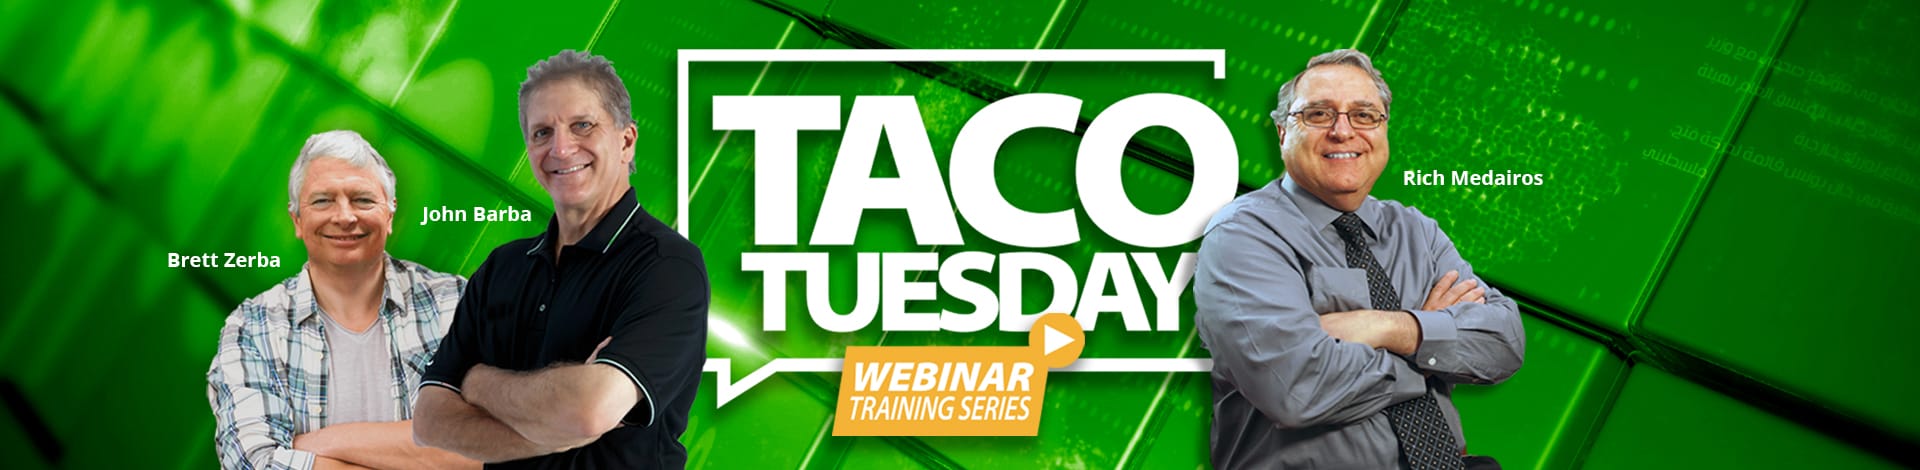 TACO Tuesdays Offer PDH Credits